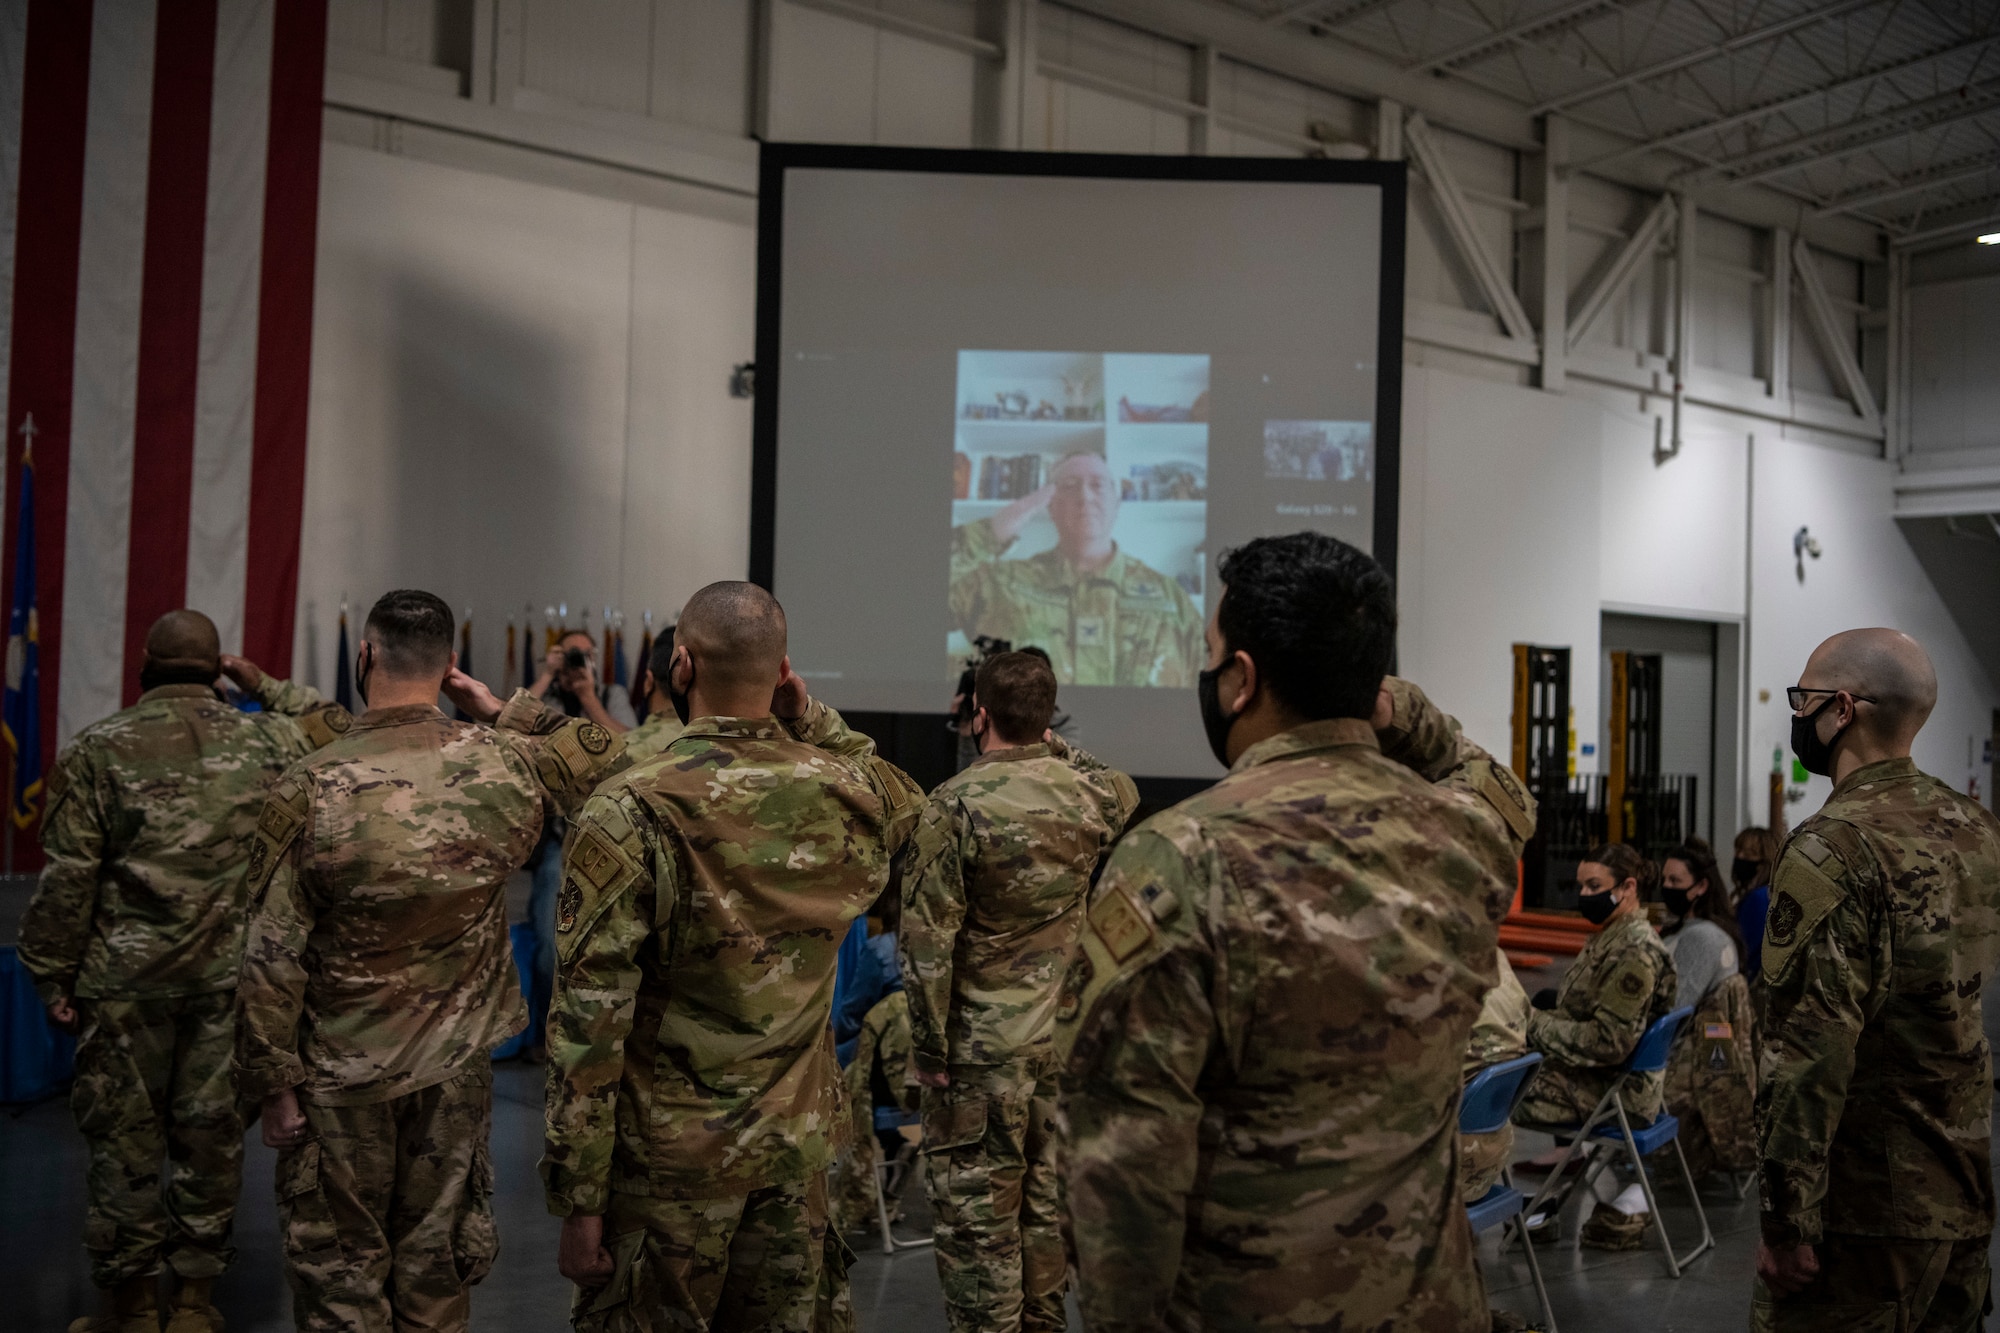 Men and Women salute a Colonel that is broadcasting in from a zoom call.